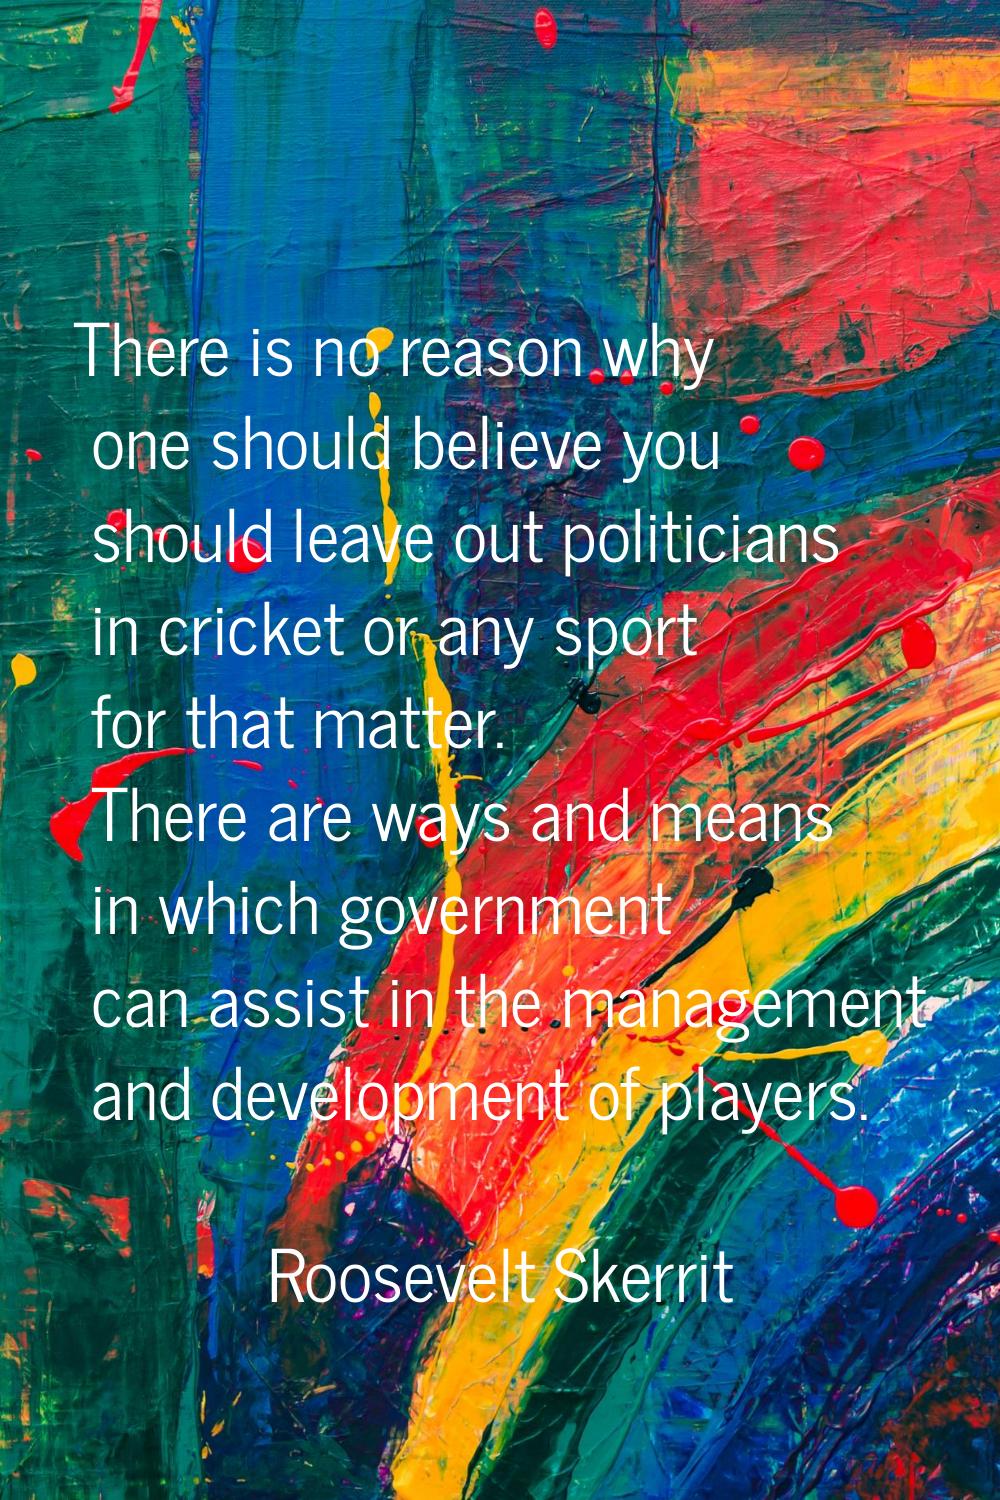 There is no reason why one should believe you should leave out politicians in cricket or any sport 